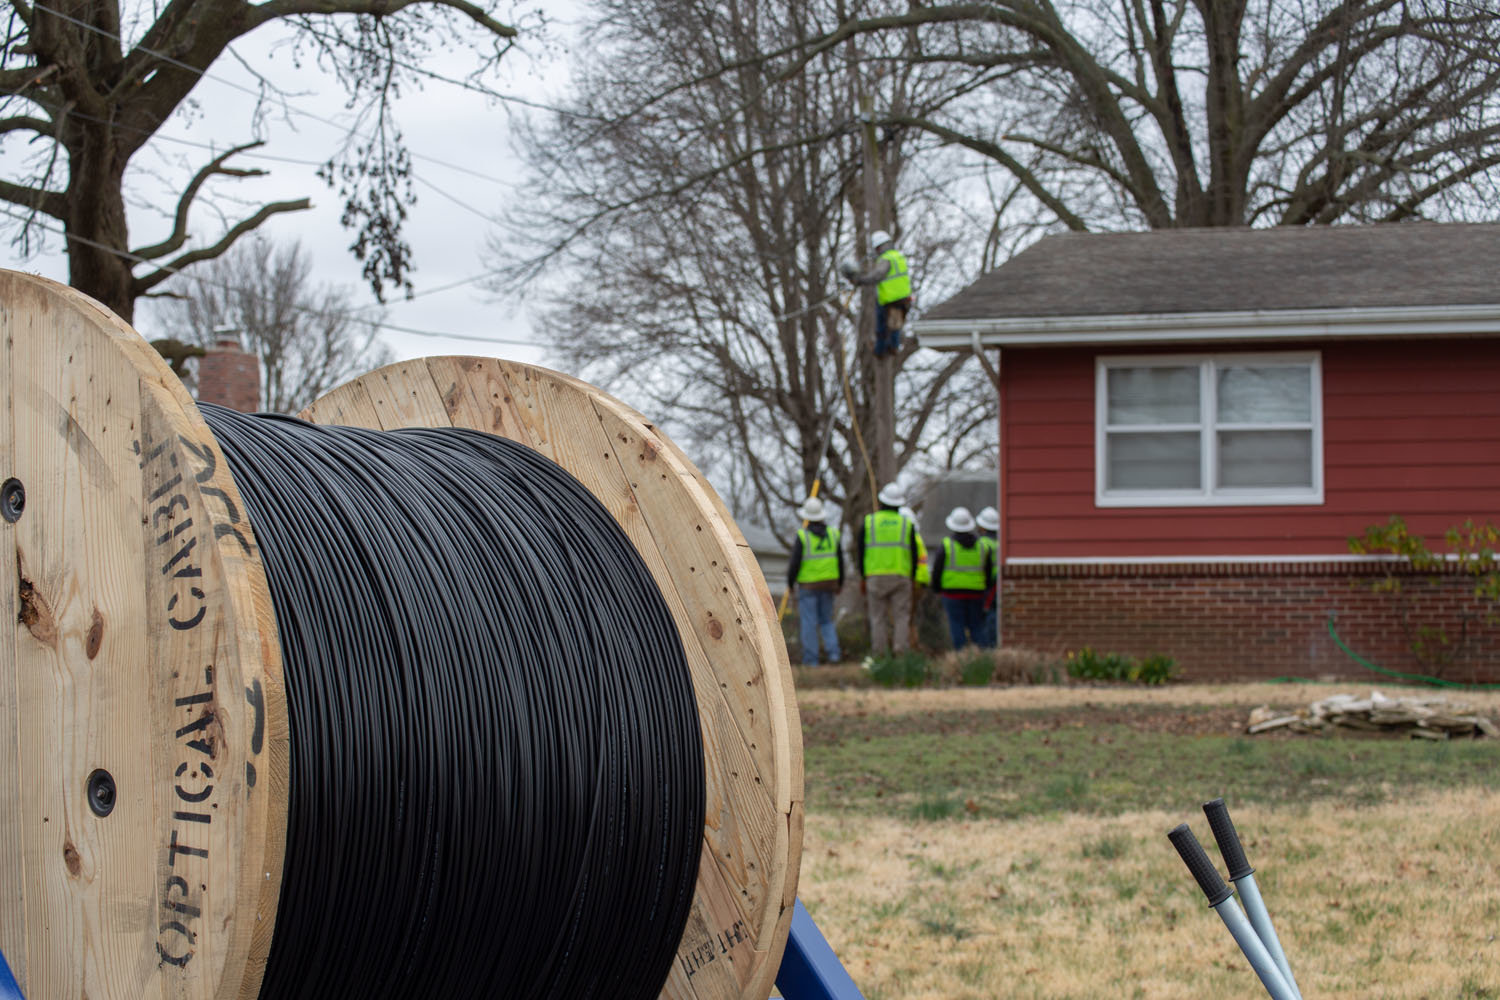 More than 1,100 new miles of fiber-optic lines are in the process of being installed throughout Springfield.